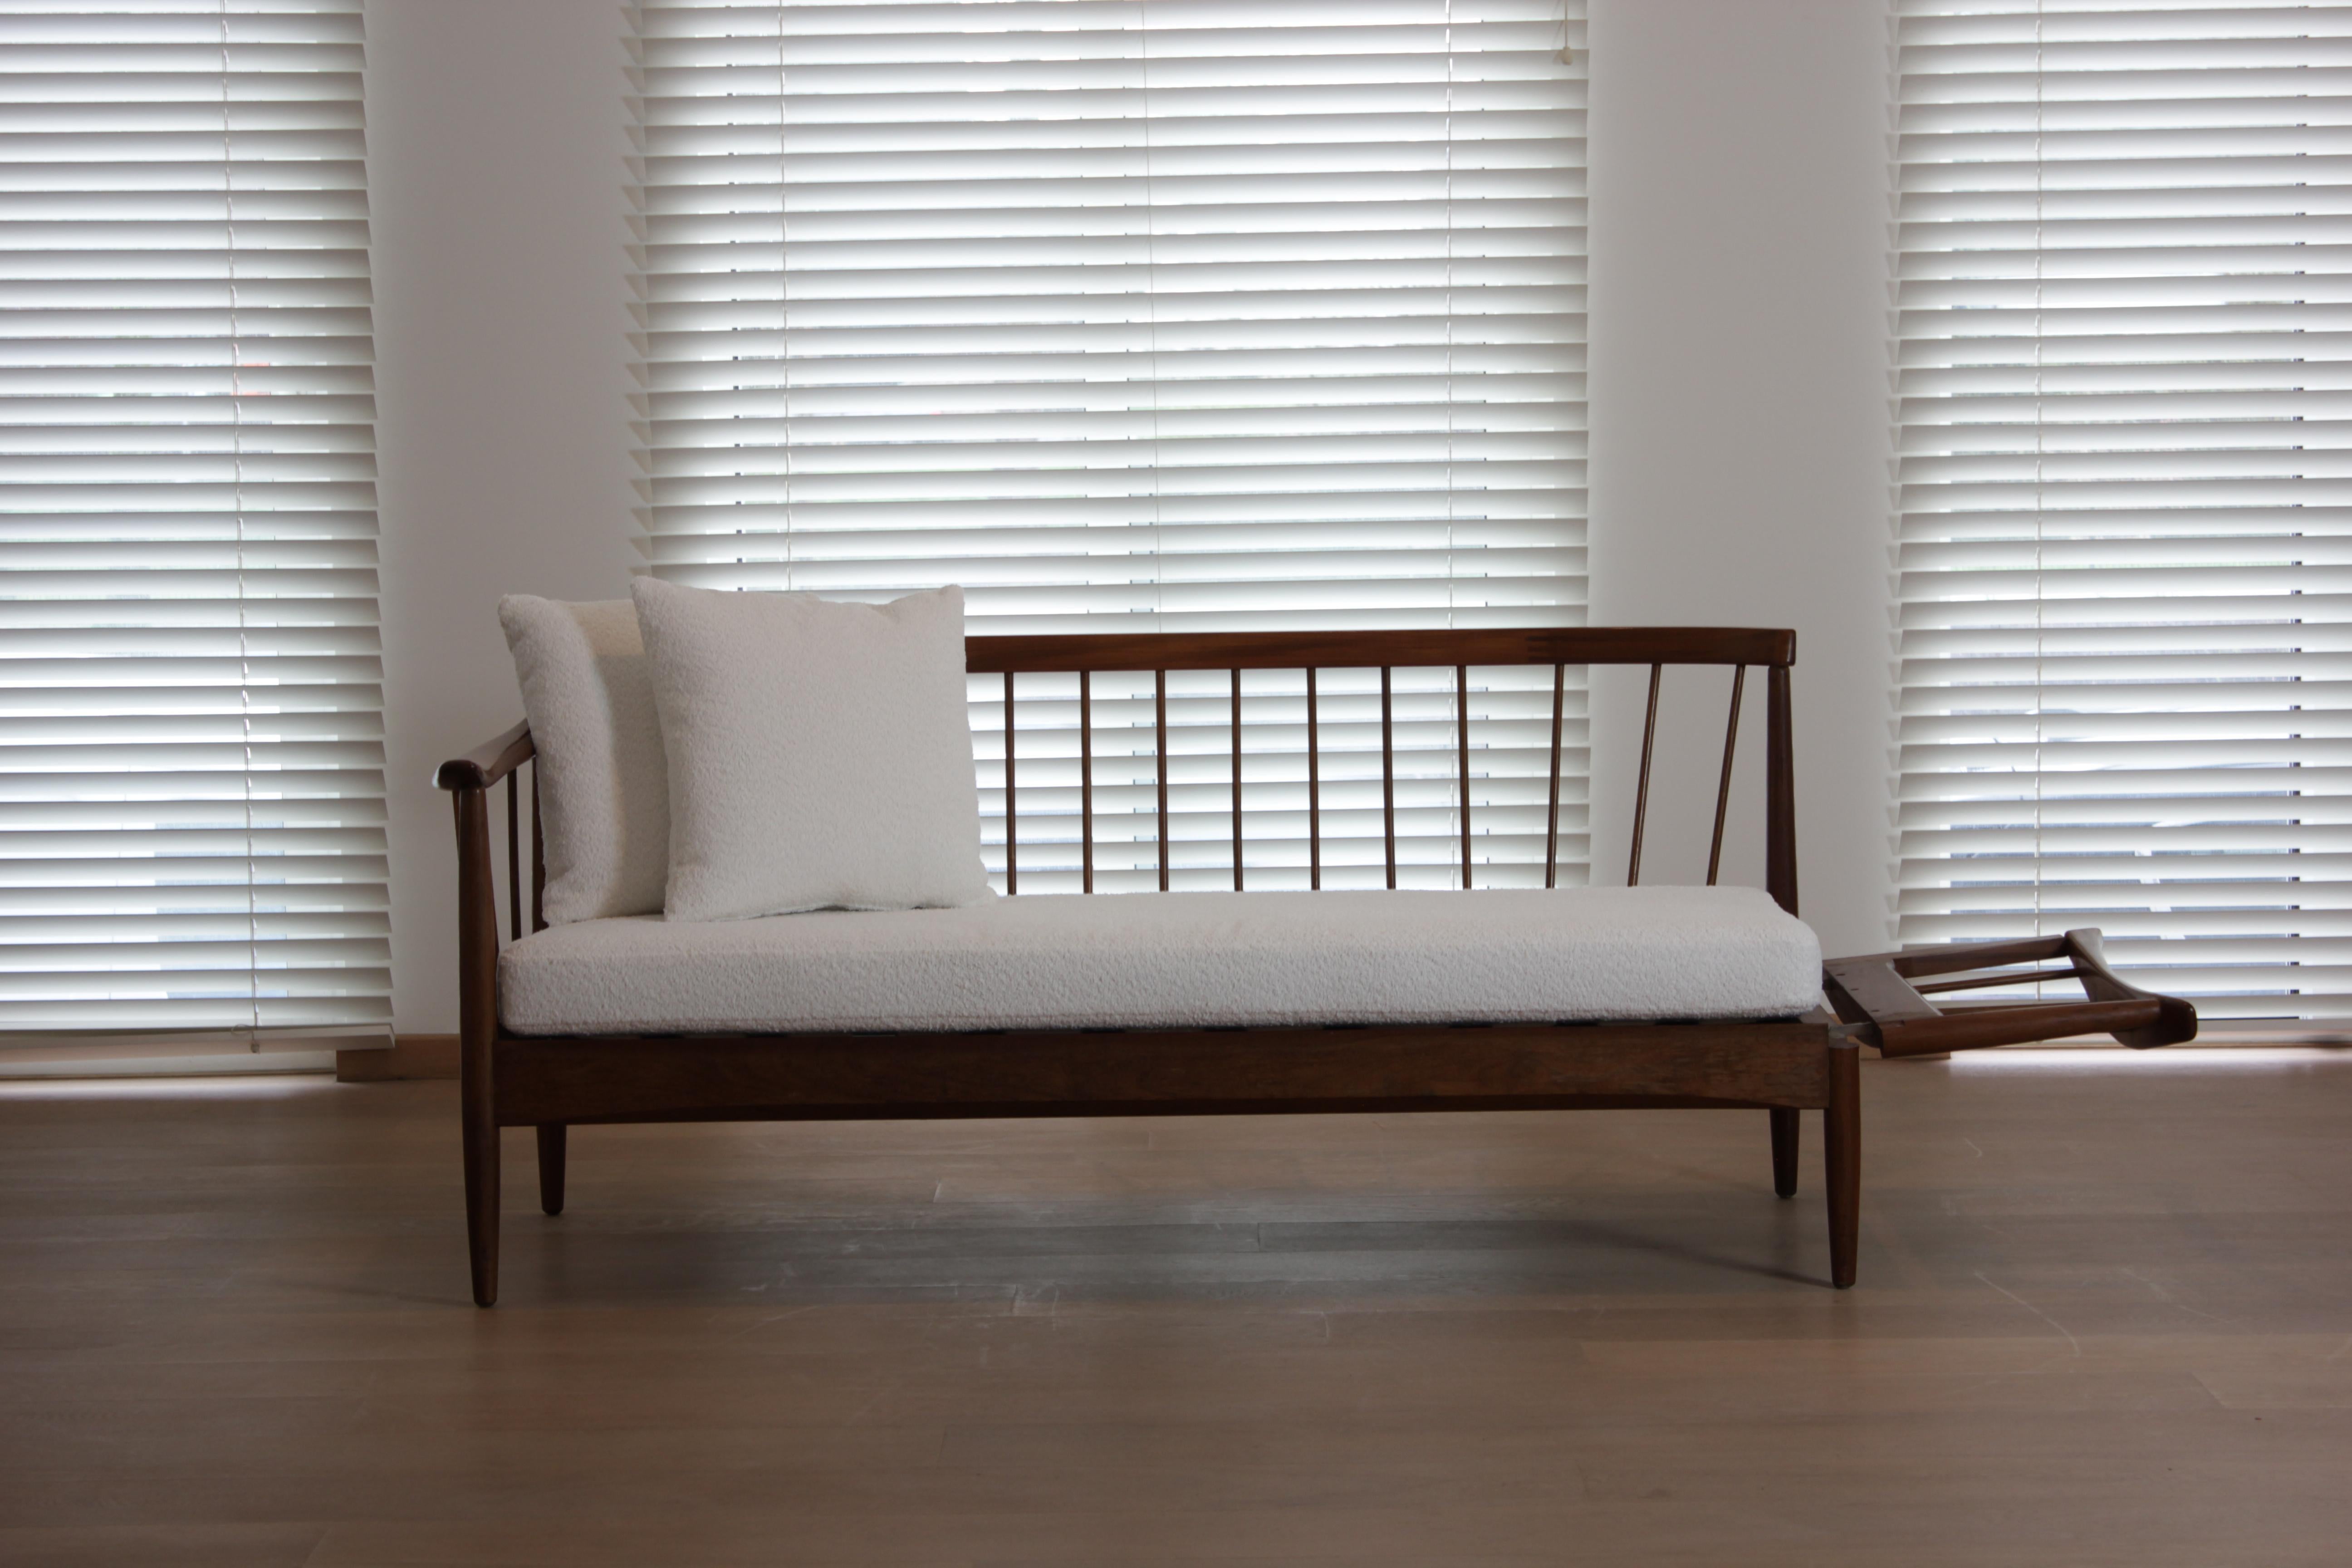 British Mid 20th Century Modern Daybed by Greaves & Thomas, 1960s For Sale